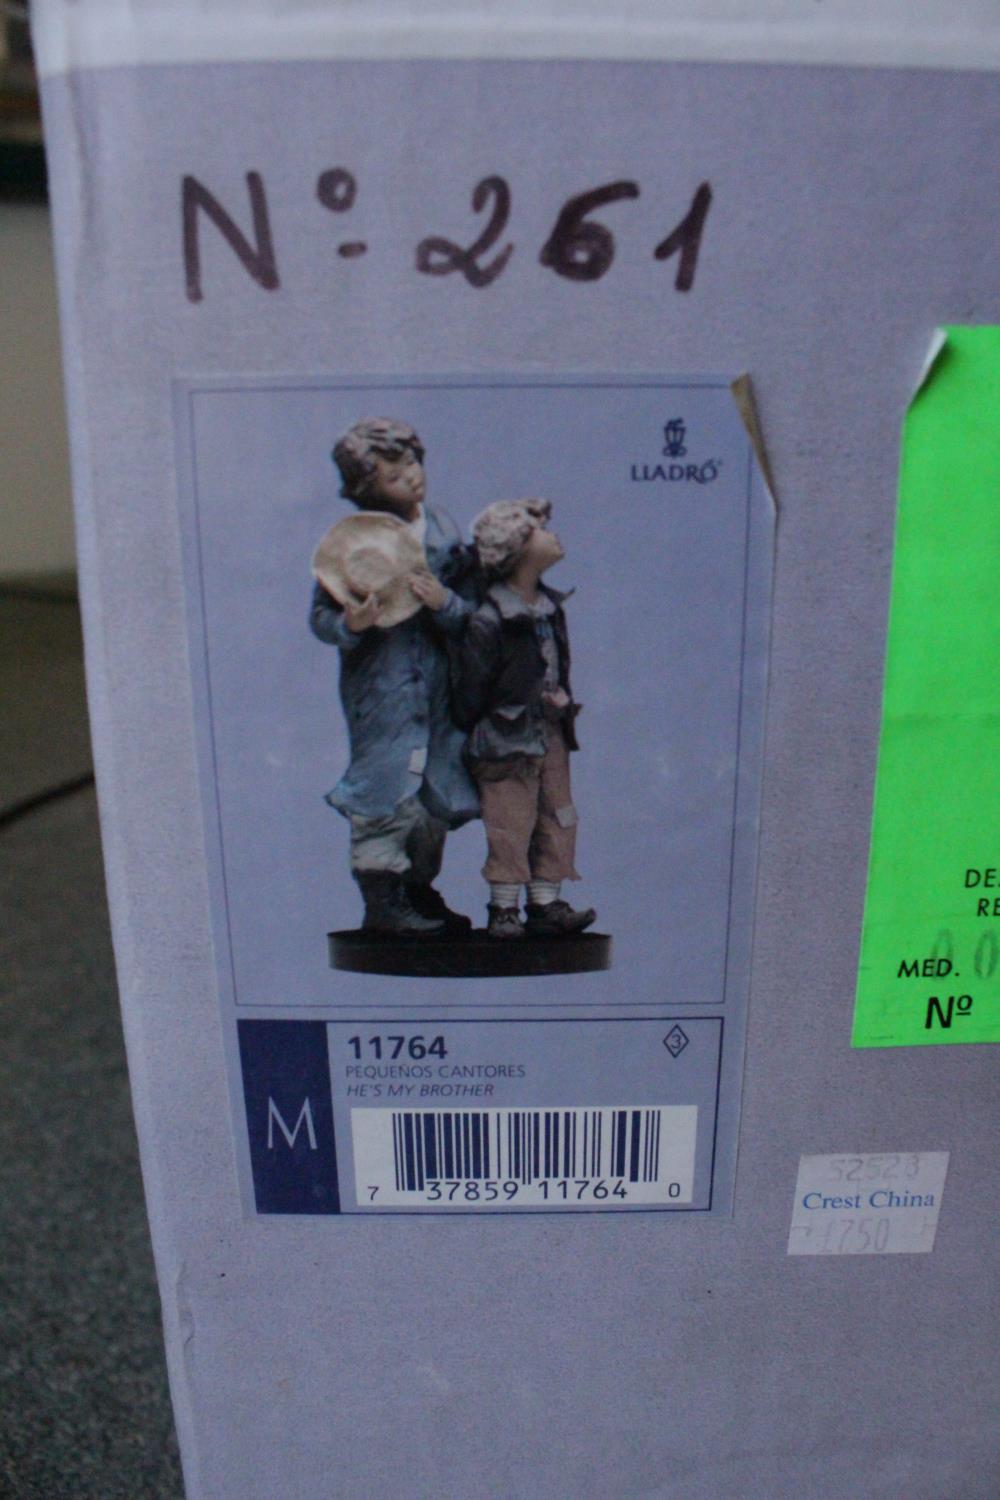 Signed Lladro Goyesca 'Hes my Brother', Limited Edition 261 of 350, Sculptor: Enrique Sanisidro. - Image 6 of 7